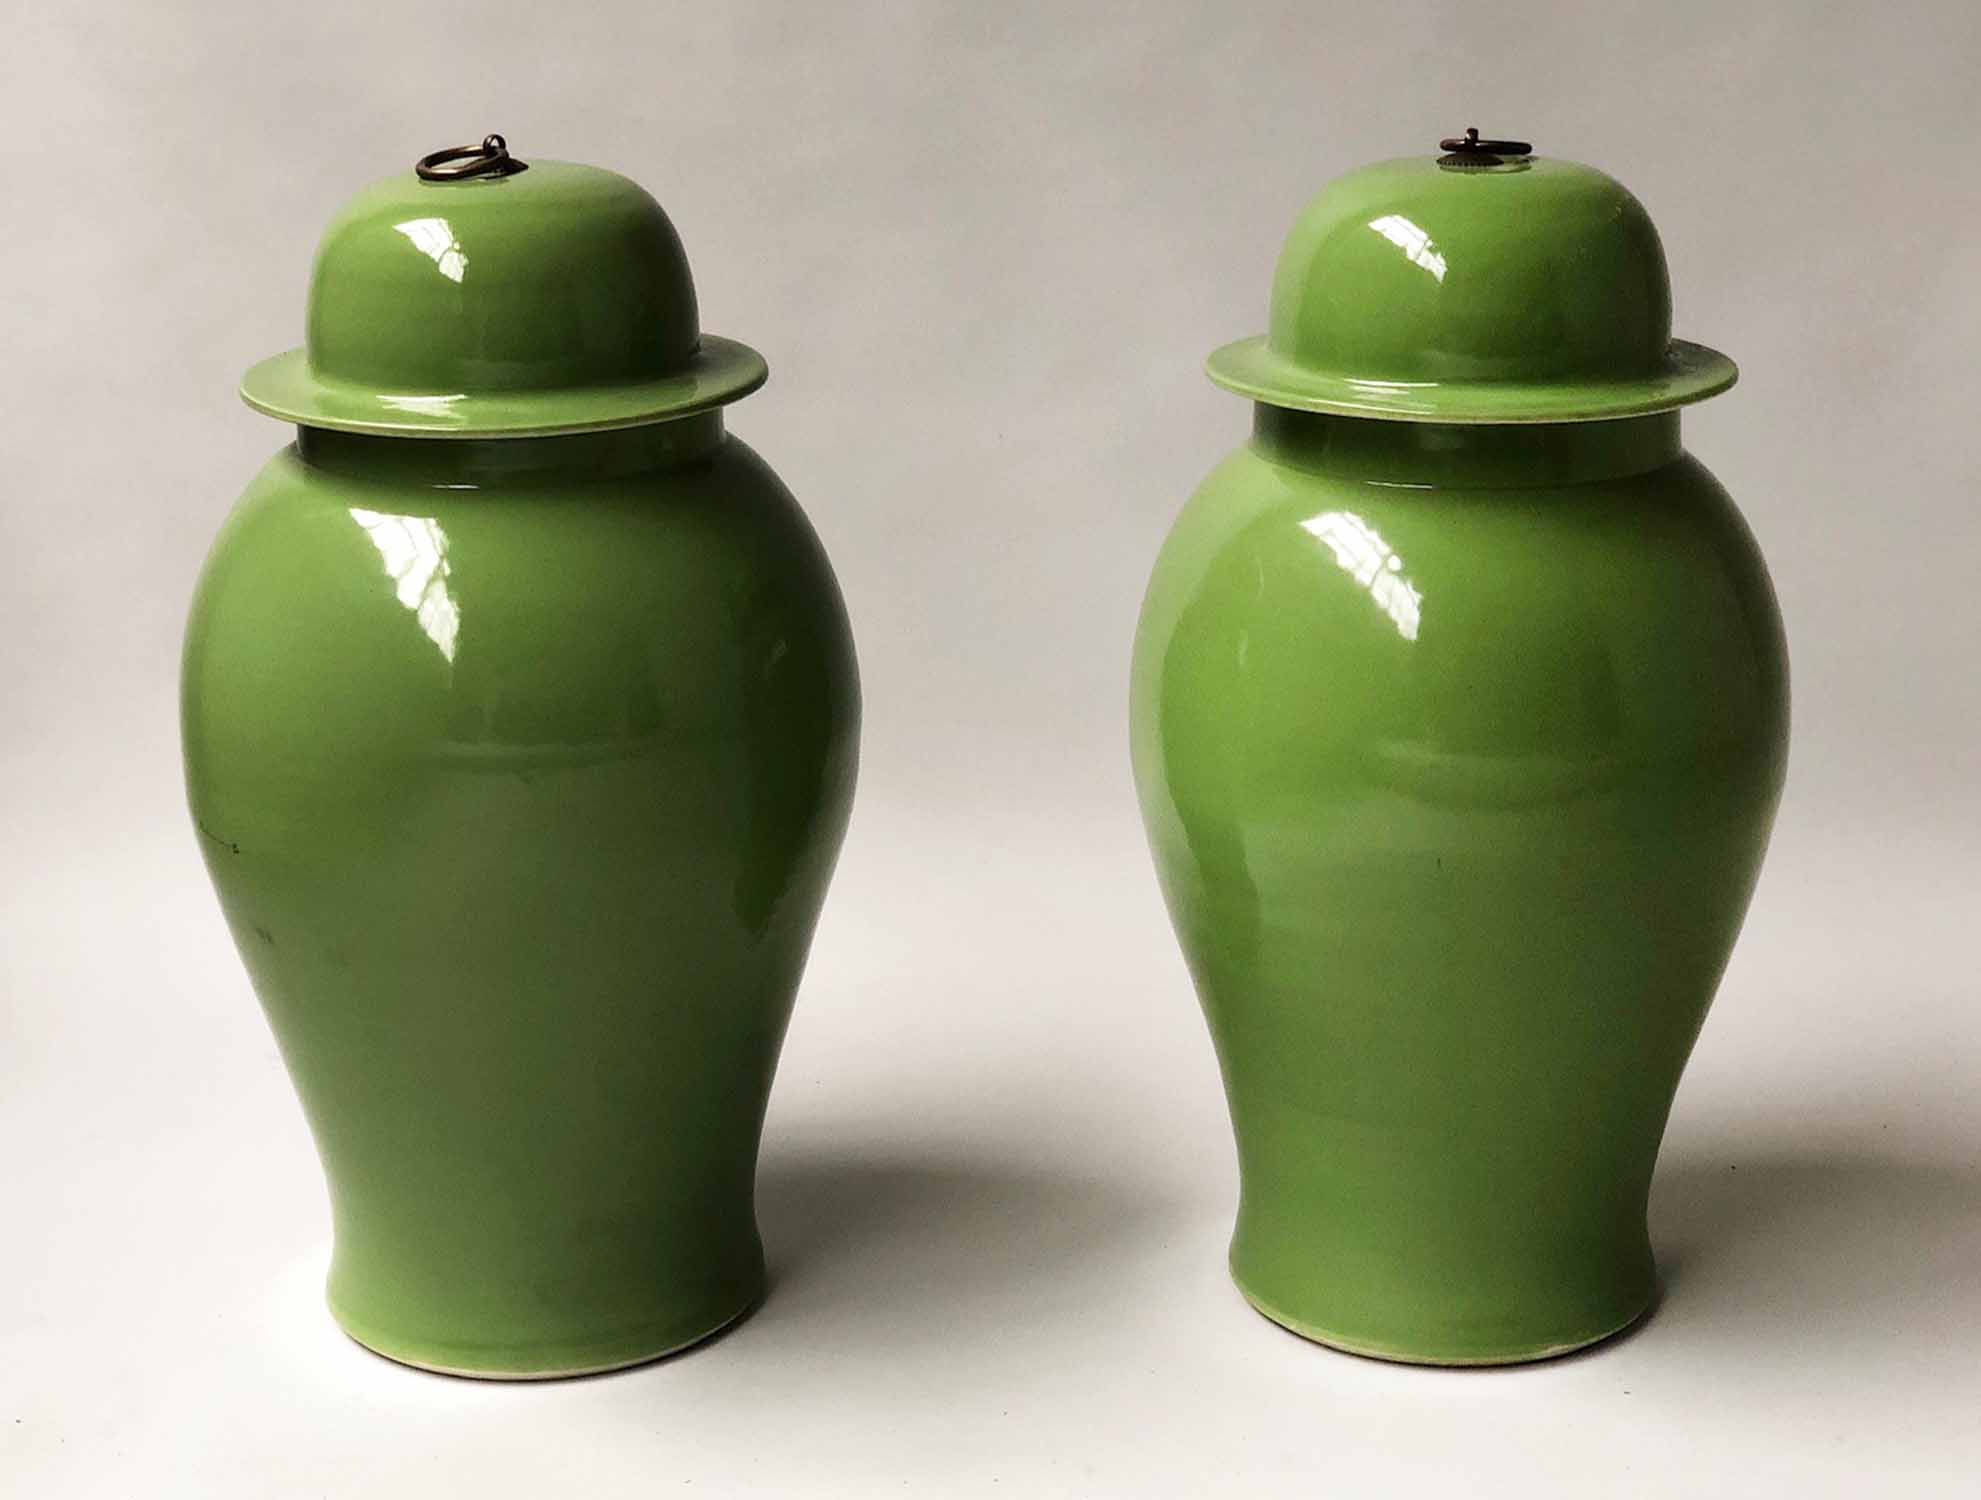 TEMPLE JARS, a pair, Chinese leaf green ceramic in the form of ginger jar with lids, 54cm H.